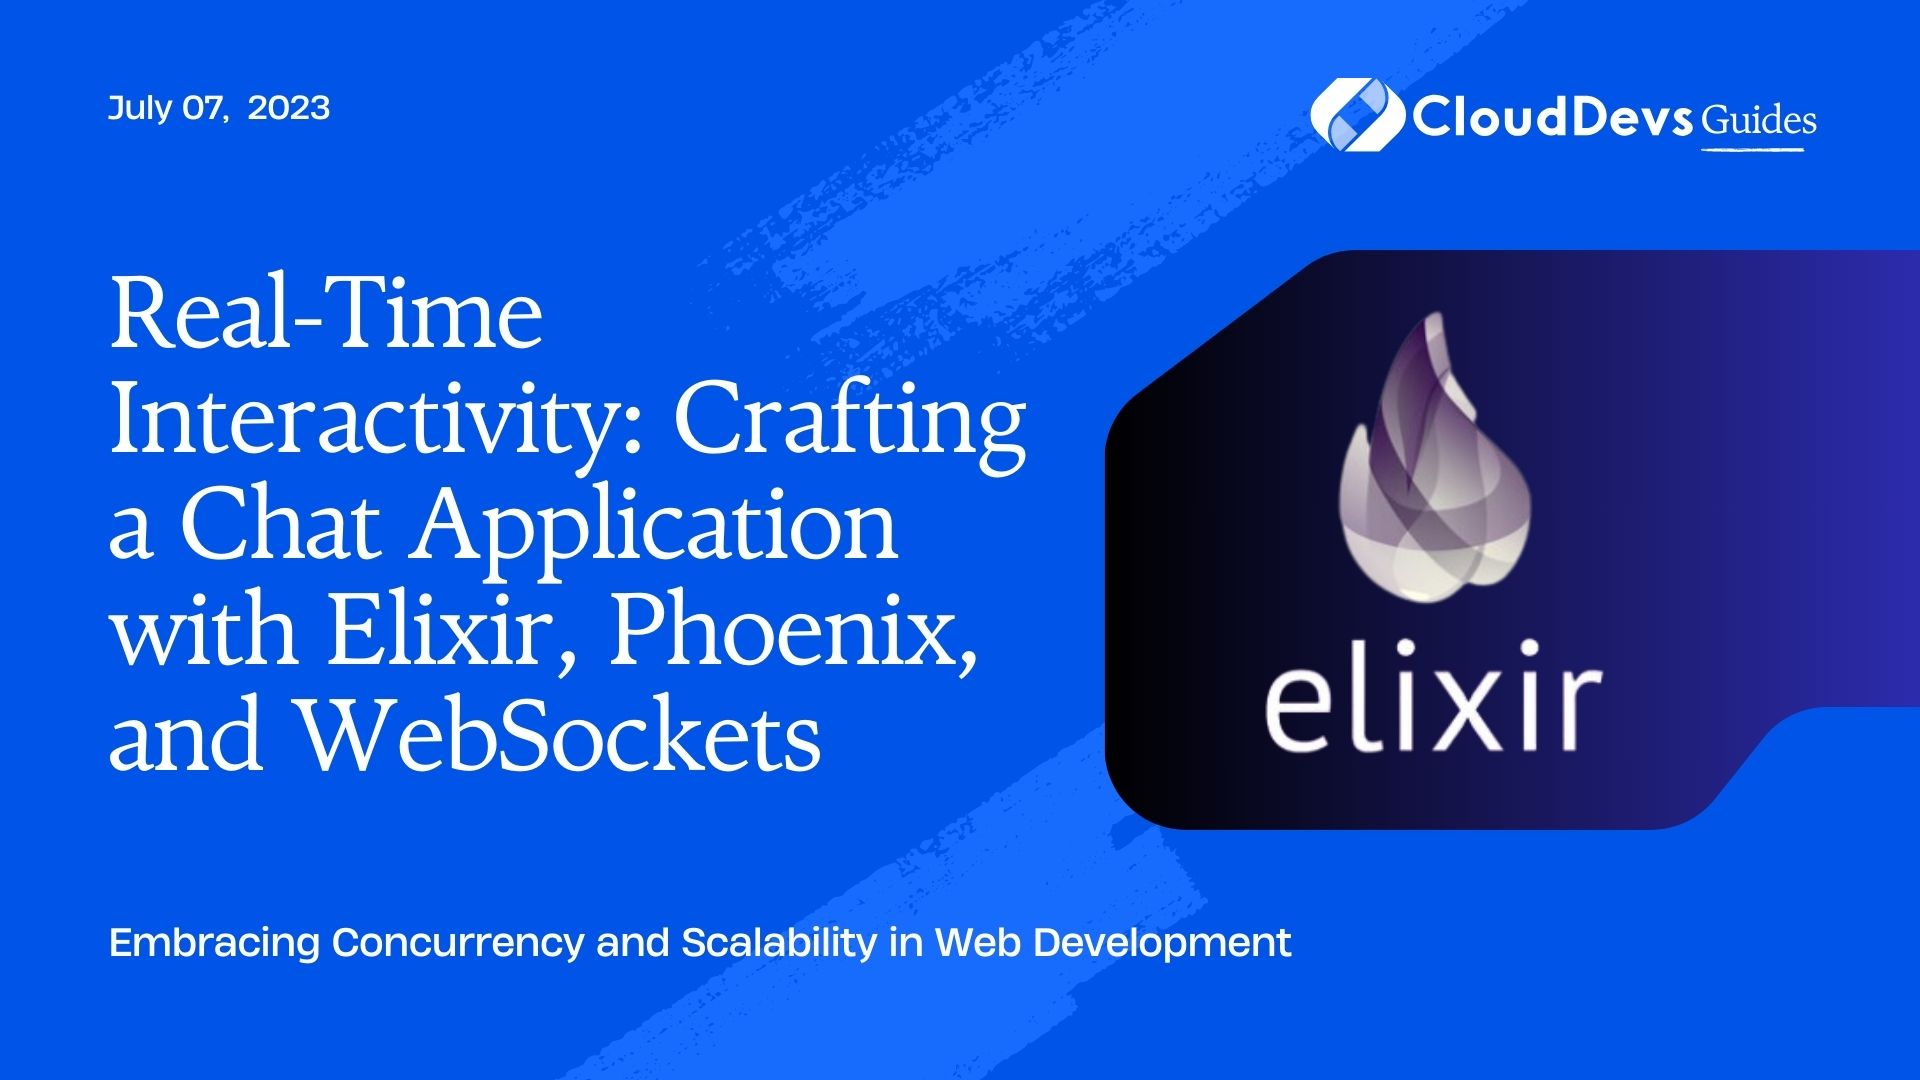 Real-Time Interactivity: Crafting a Chat Application with Elixir, Phoenix, and WebSockets